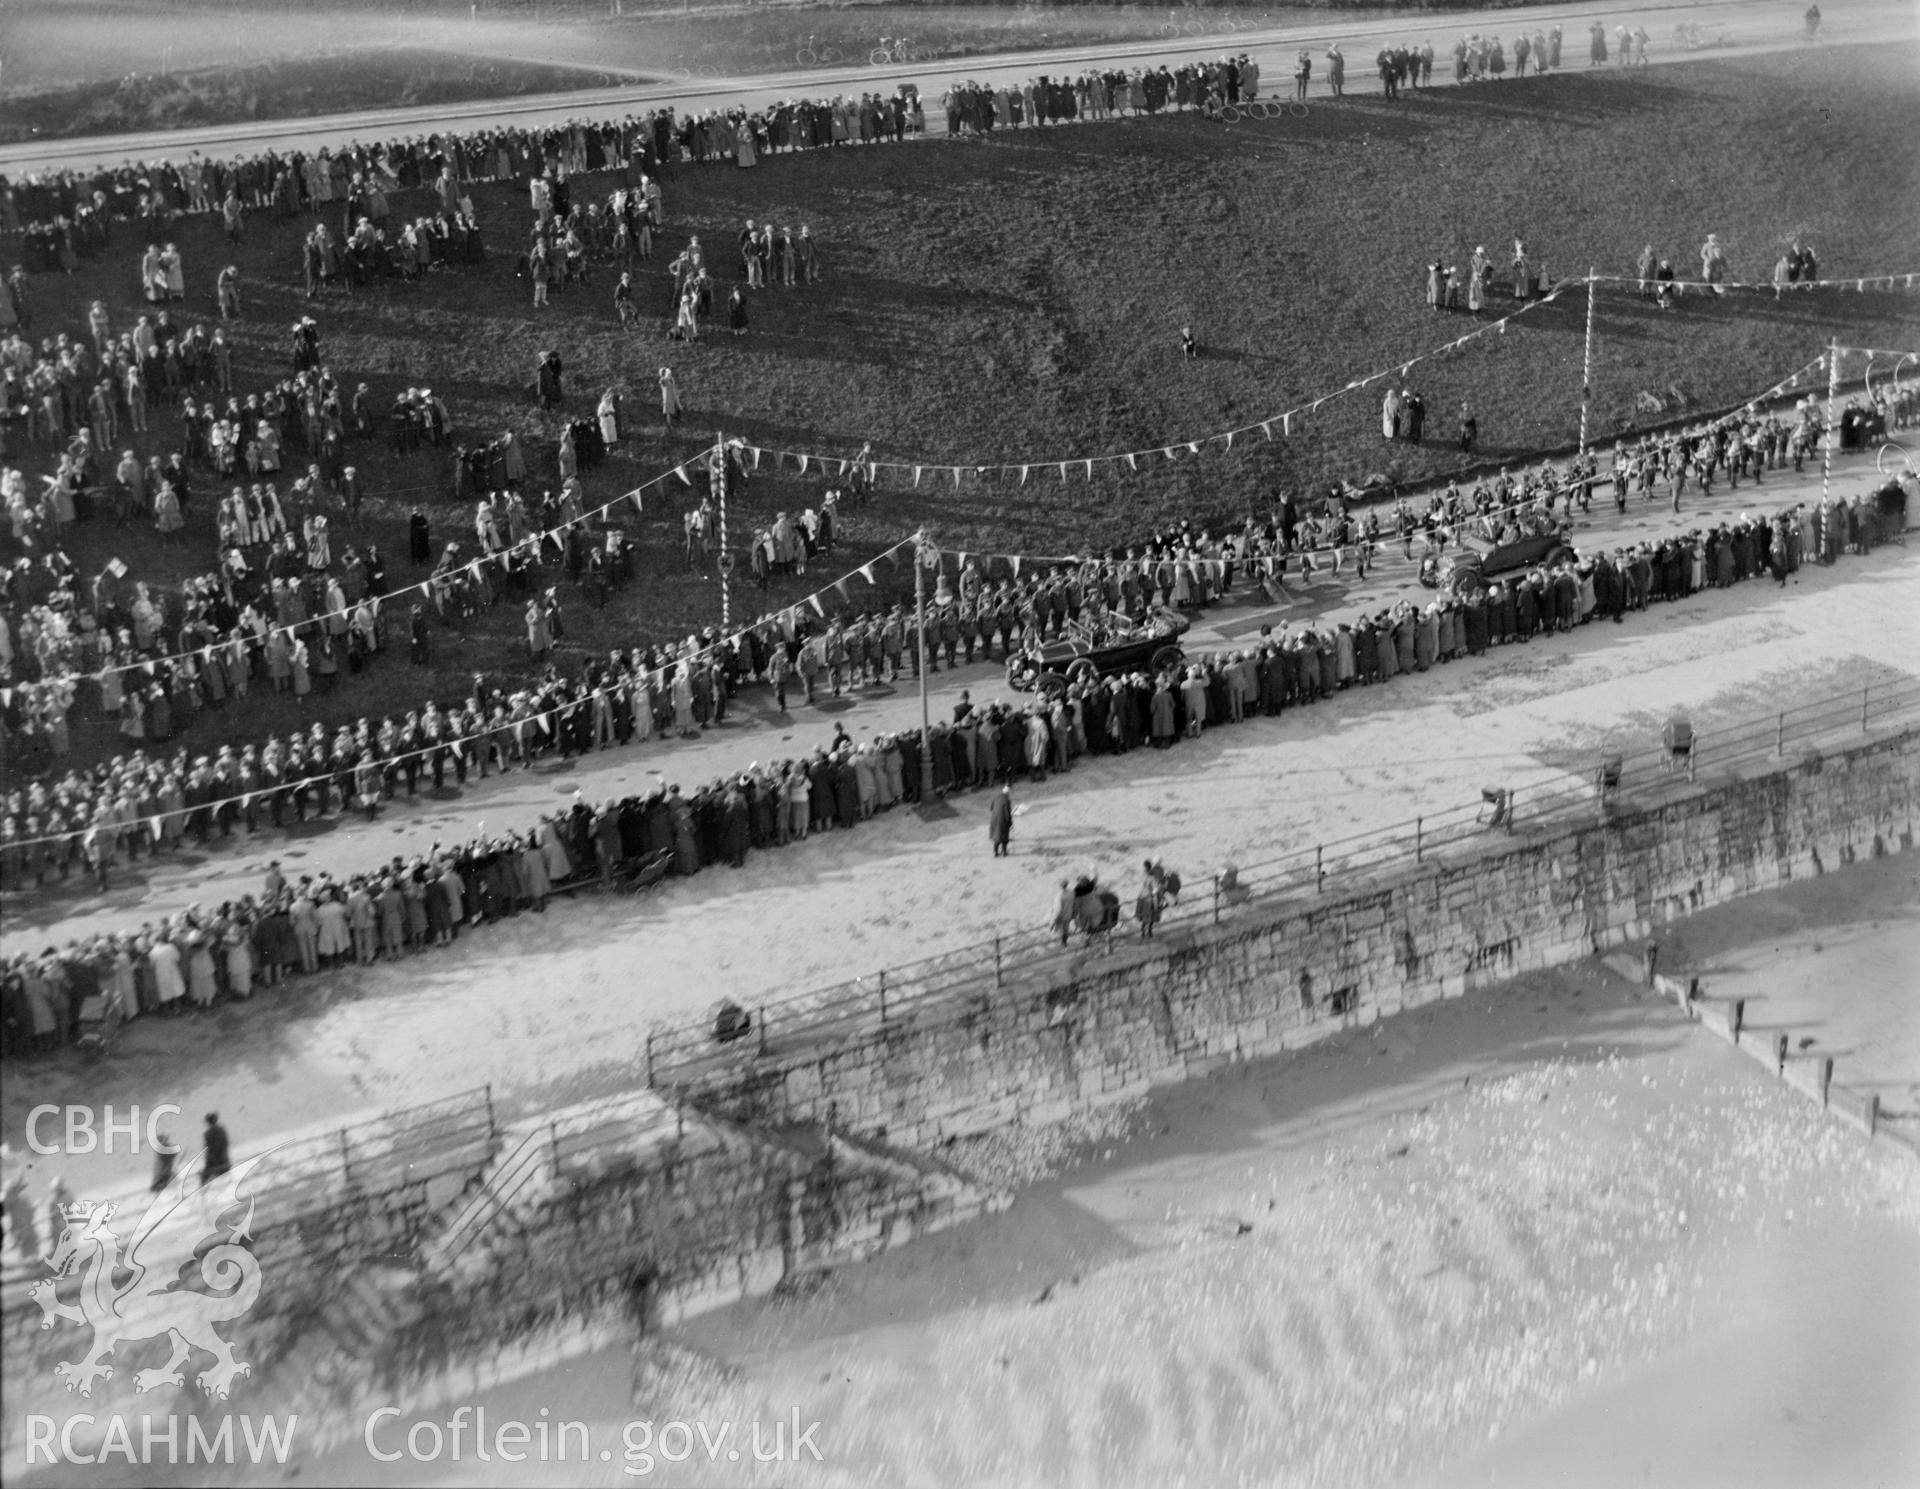 Colwyn Bay showing ceremony and crowds during during the visit of the Prince of Wales (later Edward VIII) in November 1923, oblique aerial view. 5?x4? black and white glass plate negative.